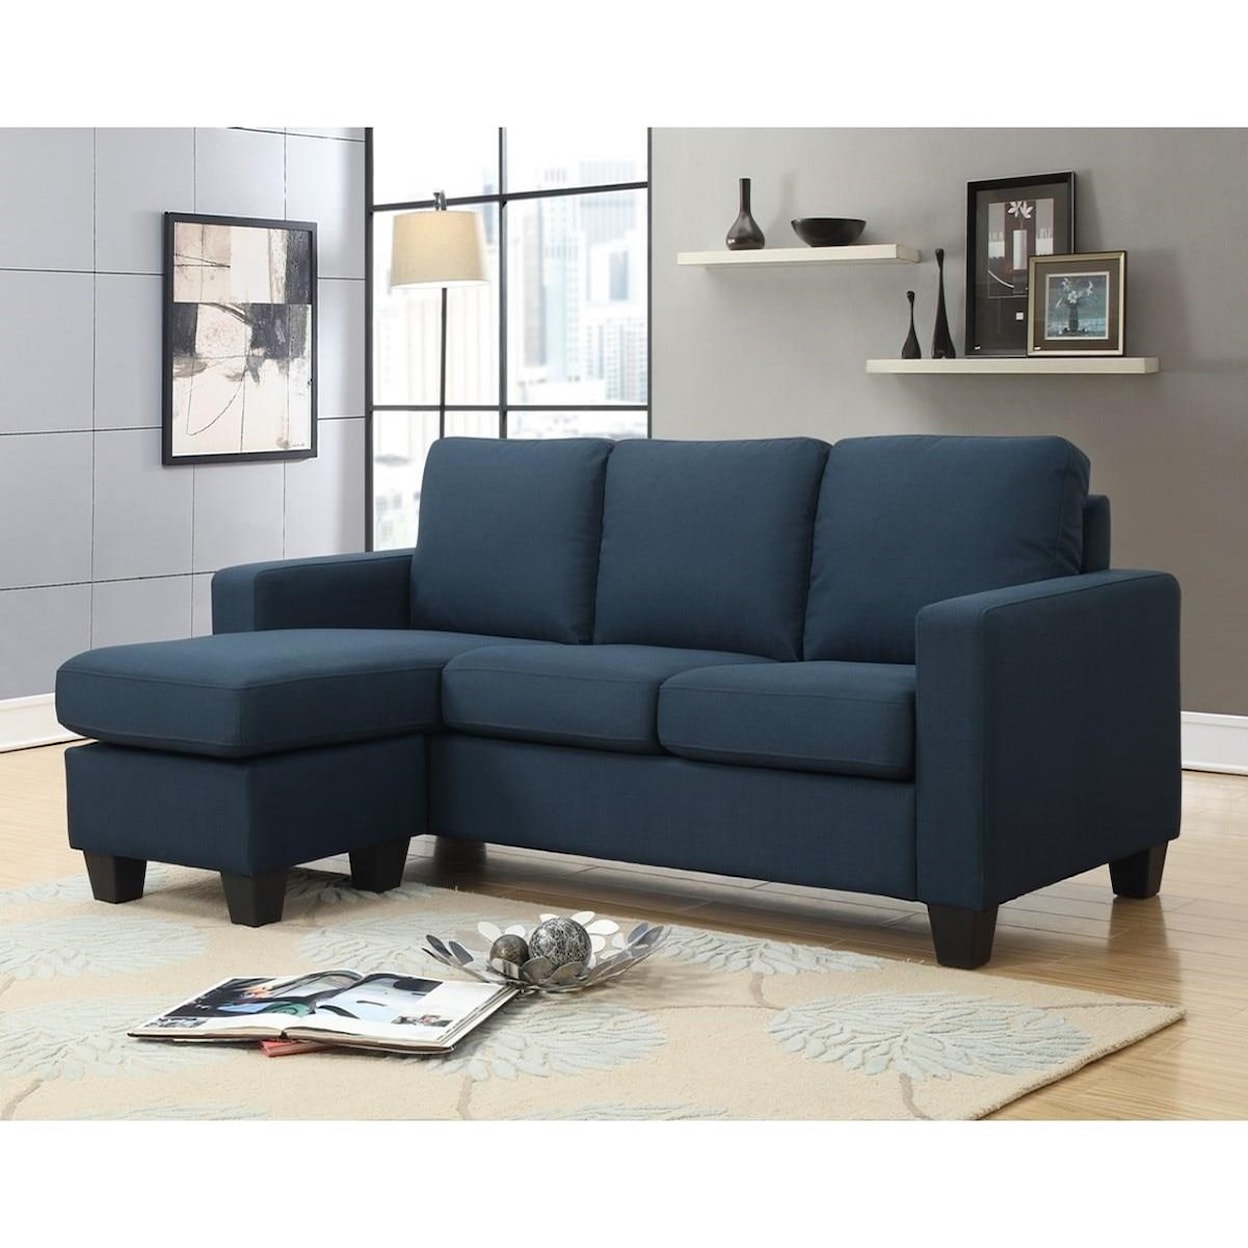 Emerald Nix Sectional Sofa with Chaise